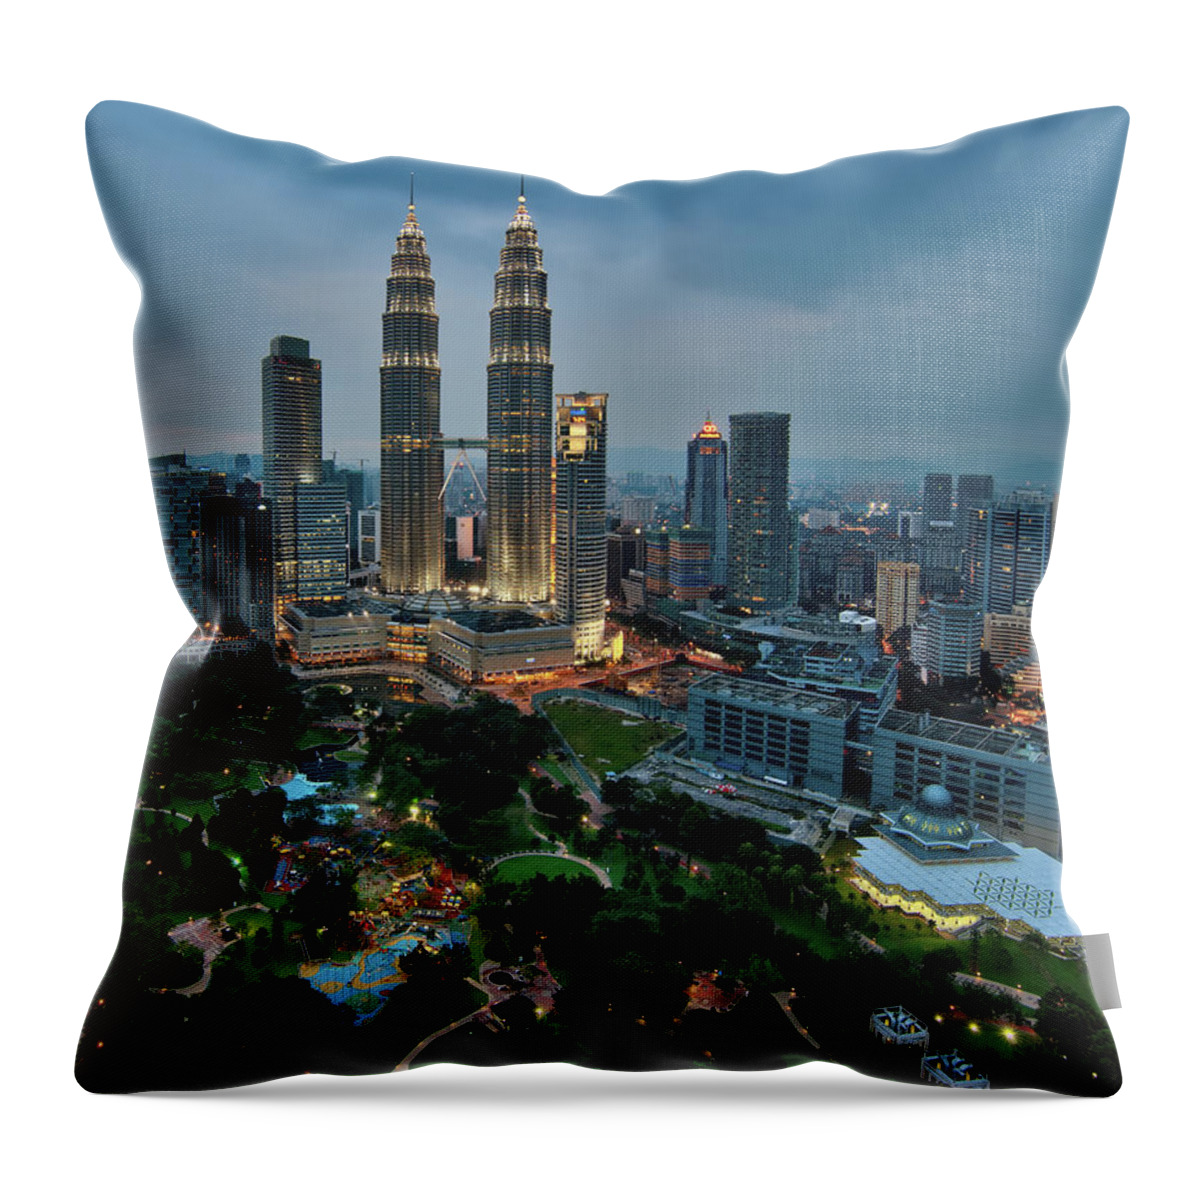 Tranquility Throw Pillow featuring the photograph Klcc Park by Artisticslice